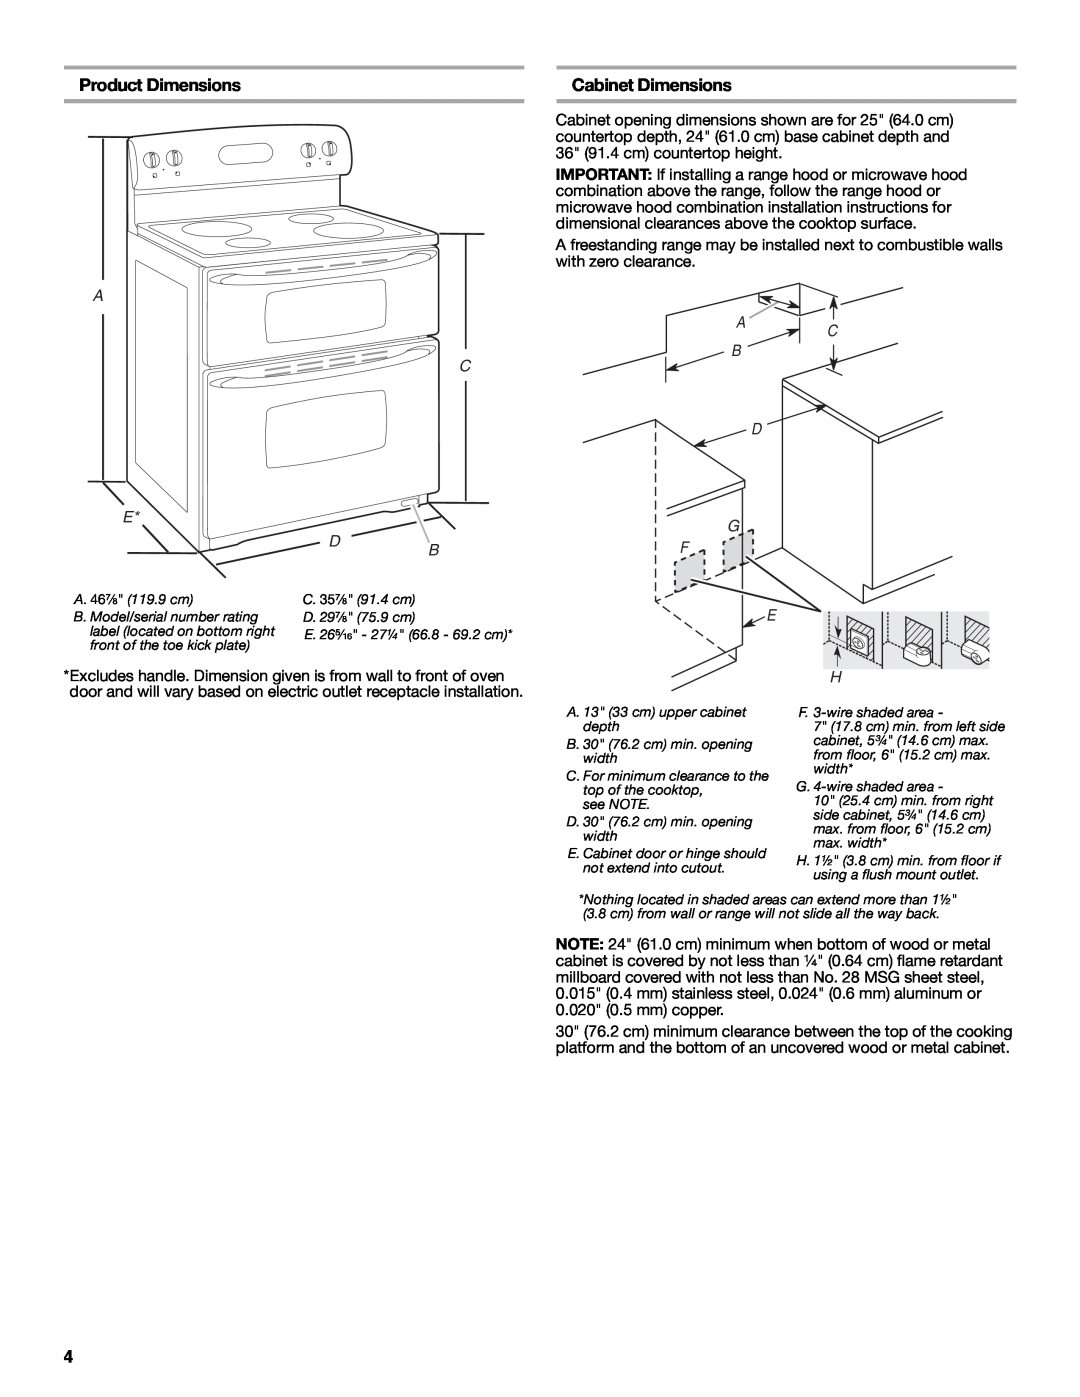 Whirlpool W10270322A installation instructions Product Dimensions, Cabinet Dimensions, A B D G F 